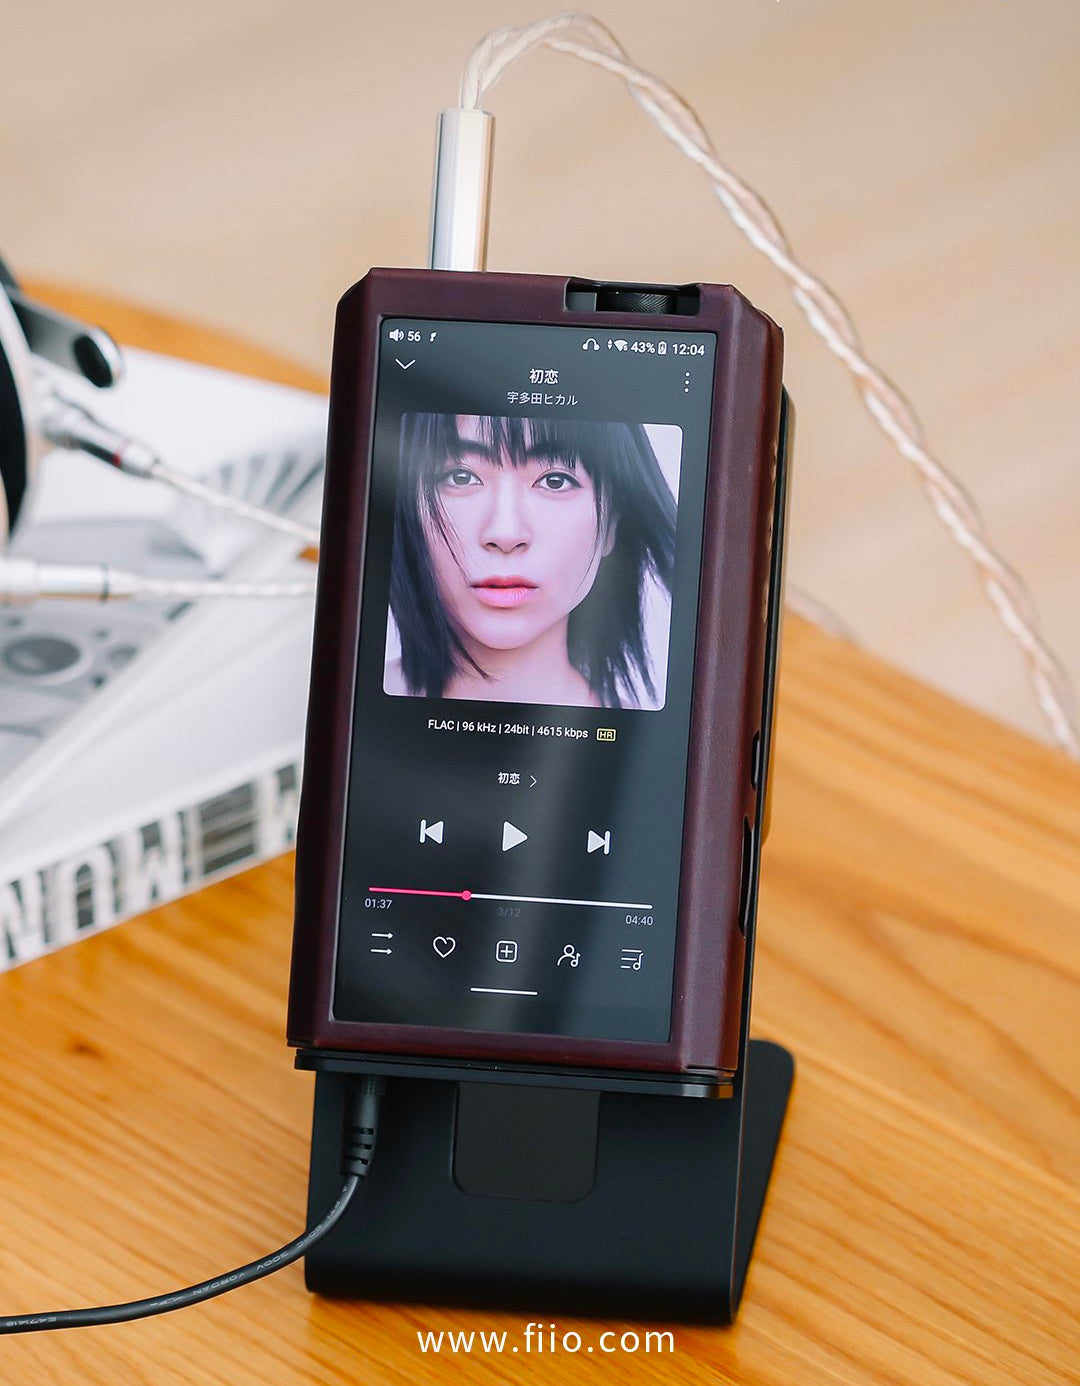 FiiO Releases Latest Firmware FW1.0.4 For M17 Flagship Digital Audio Player